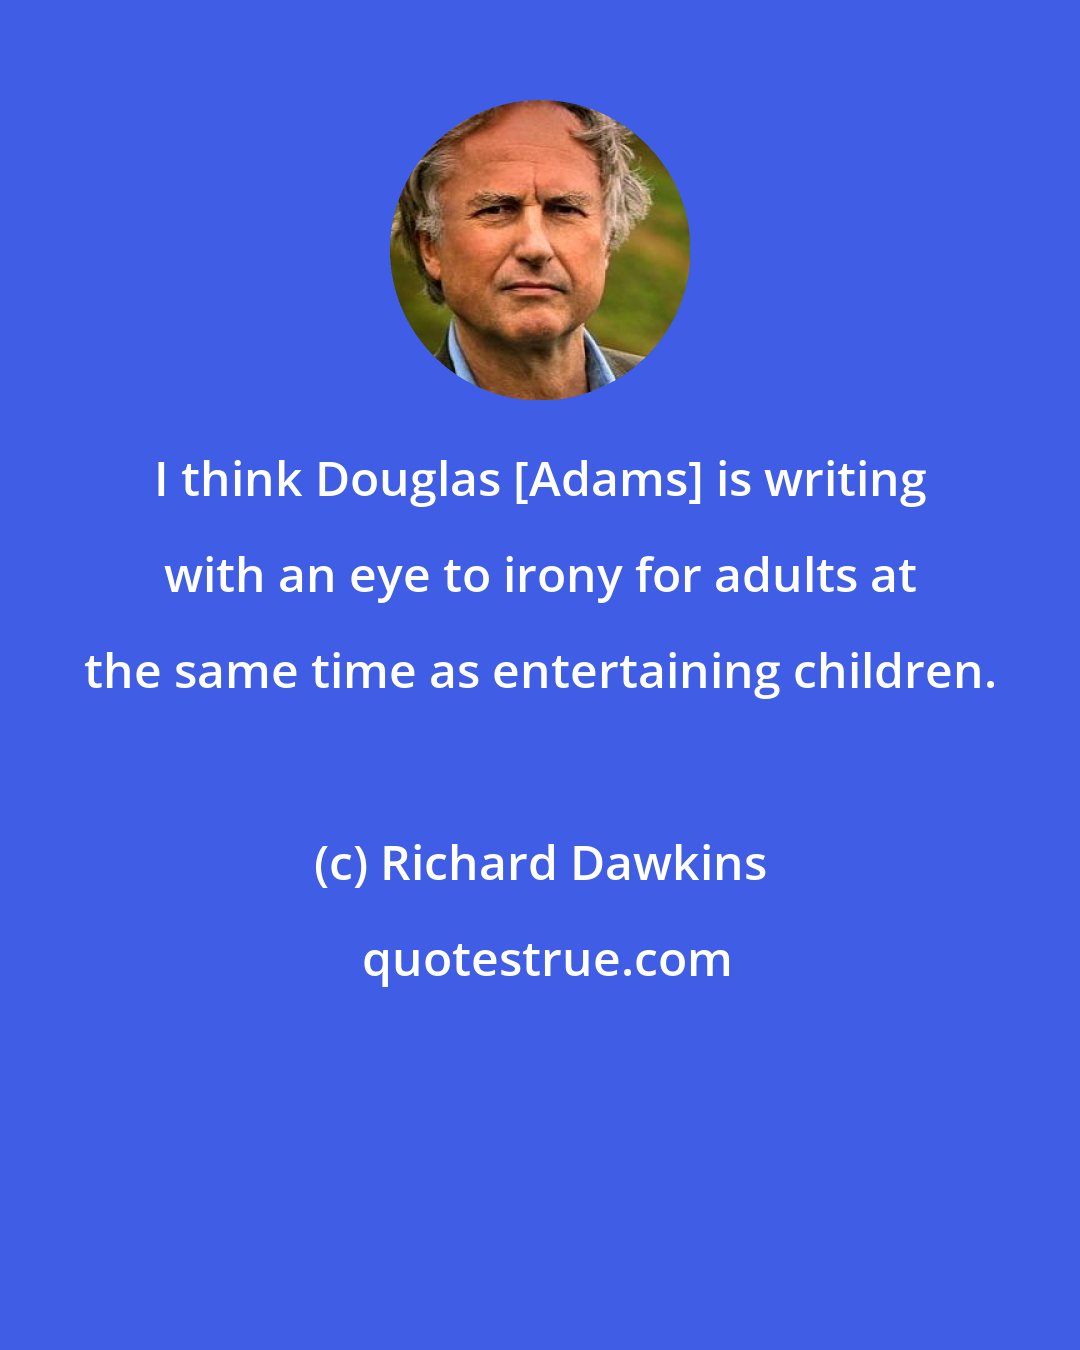 Richard Dawkins: I think Douglas [Adams] is writing with an eye to irony for adults at the same time as entertaining children.